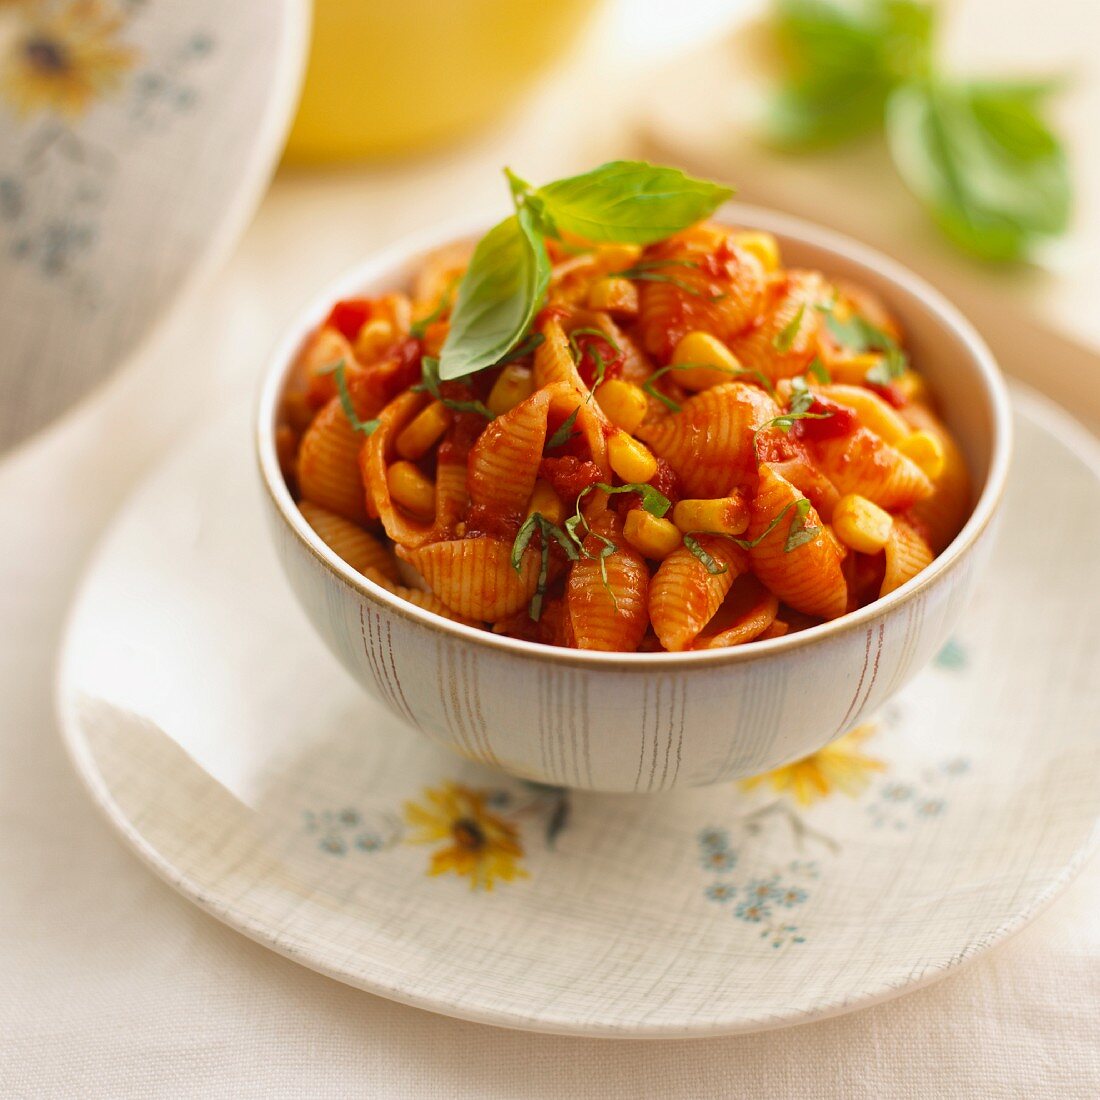 Pasta shells with tomato sauce, sweetcorn and basil